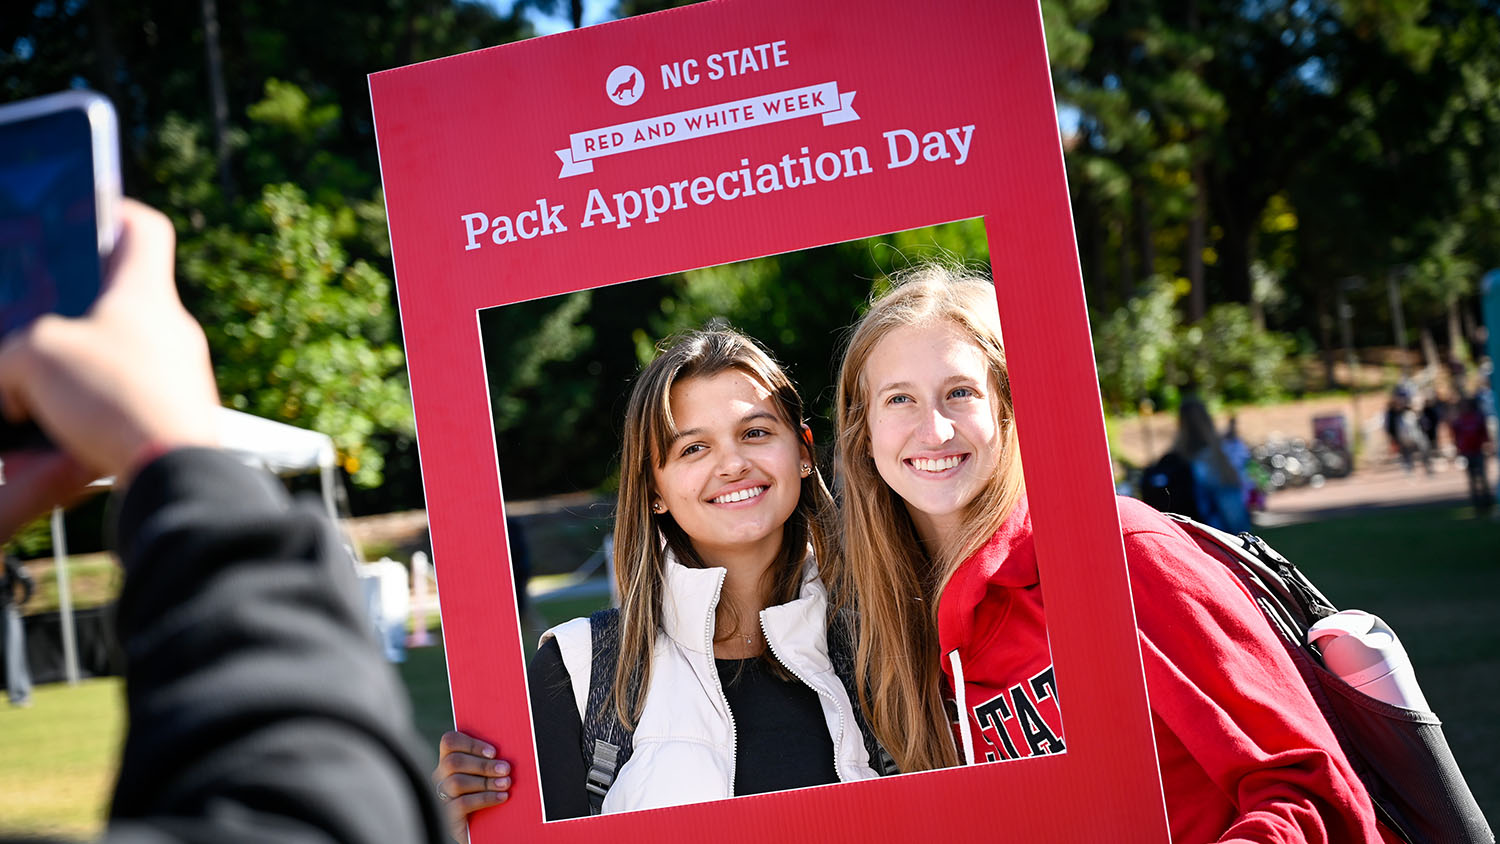 Two women pose with a poster that says "Pack Appreciation Day."